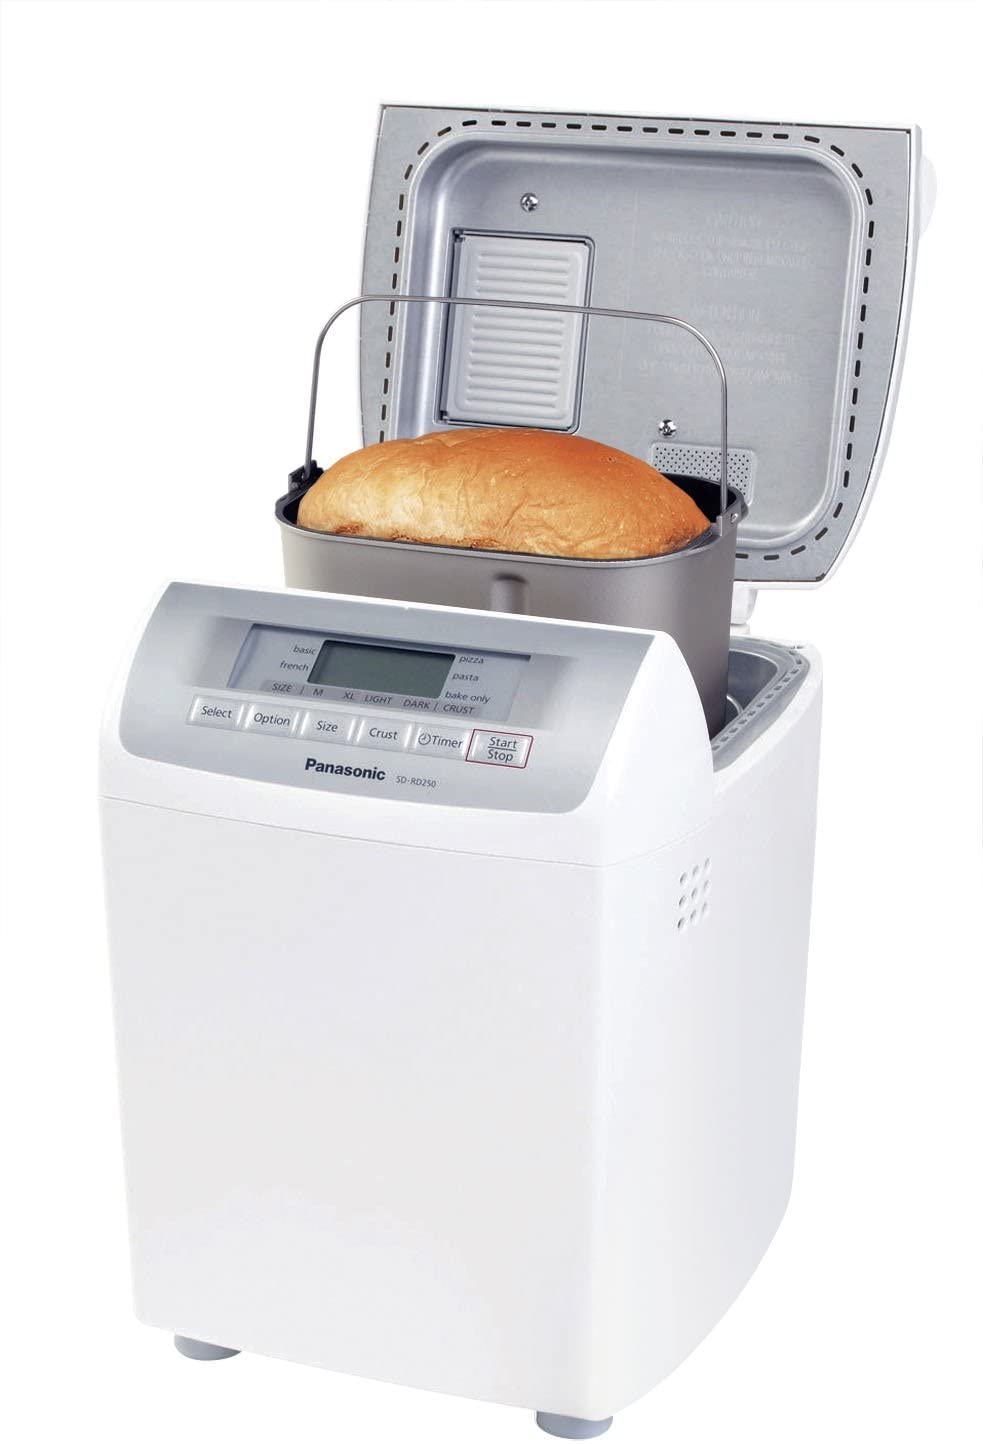 PANASONIC Automatic Bread Maker - Refurbished with Home Essentials warranty -  SDRD250